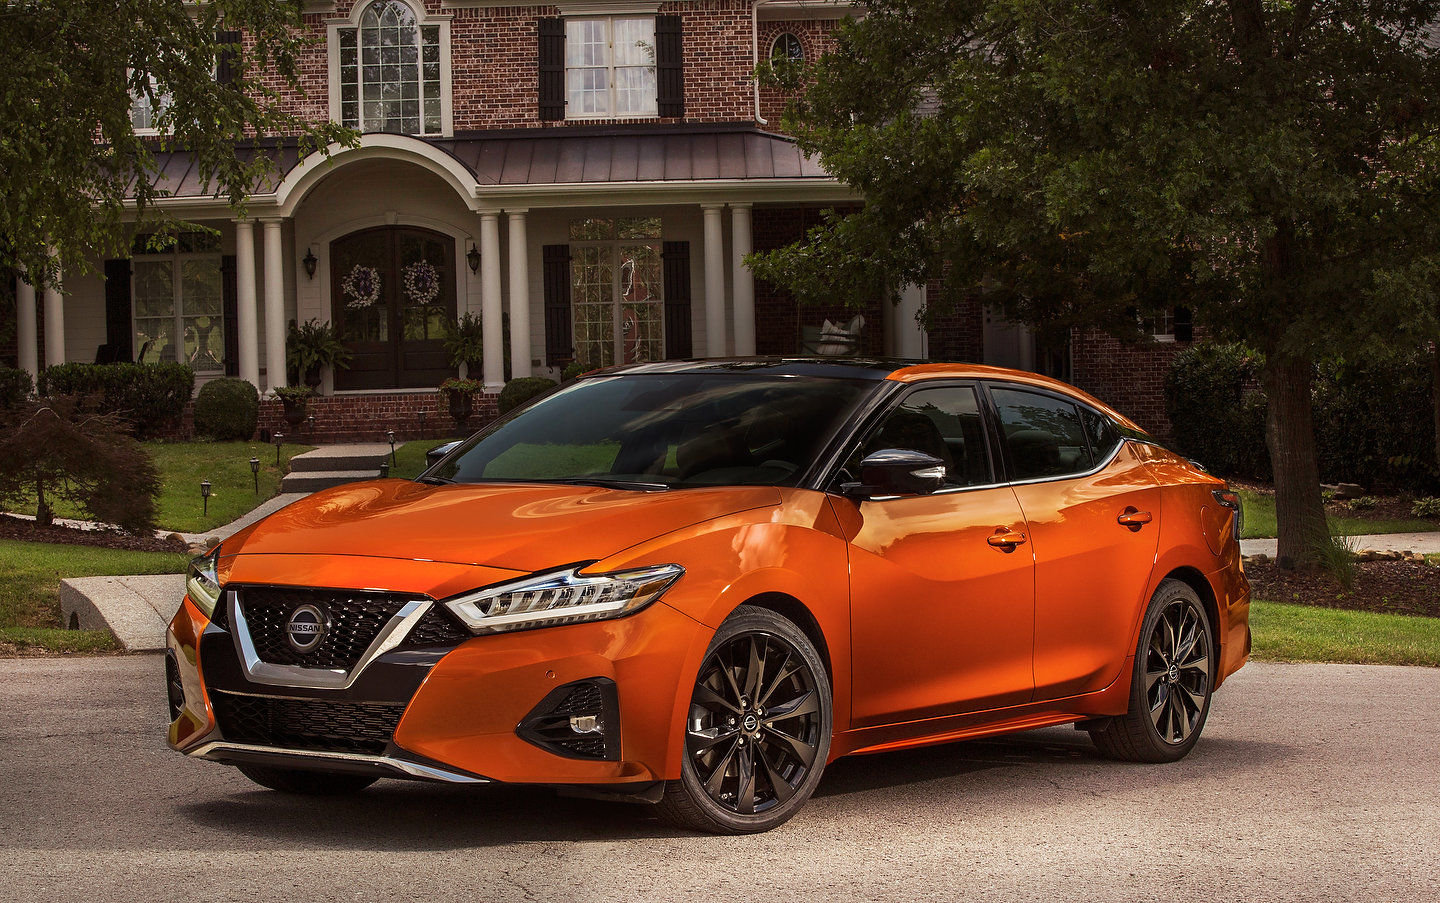 2020 Nissan Maxima: A Perfect Blend of Style, Performance, and Elegance